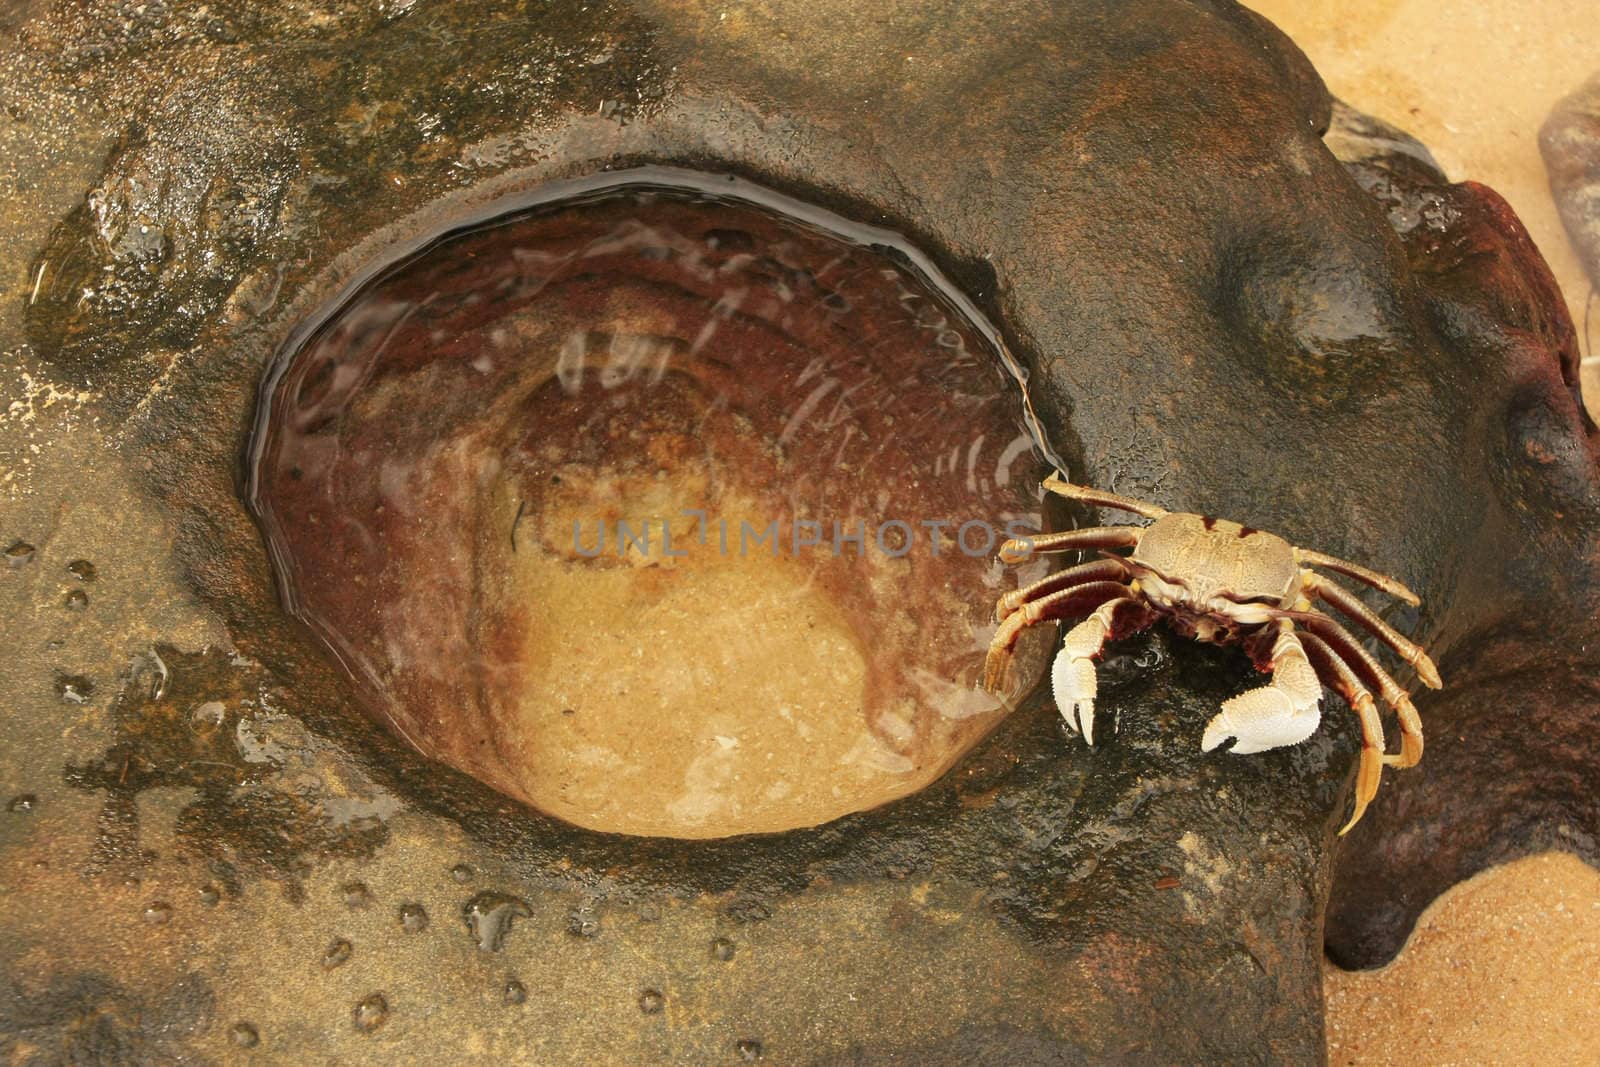 Horn-eyed ghost crab (Ocypode ceratophthalmus) on a rock